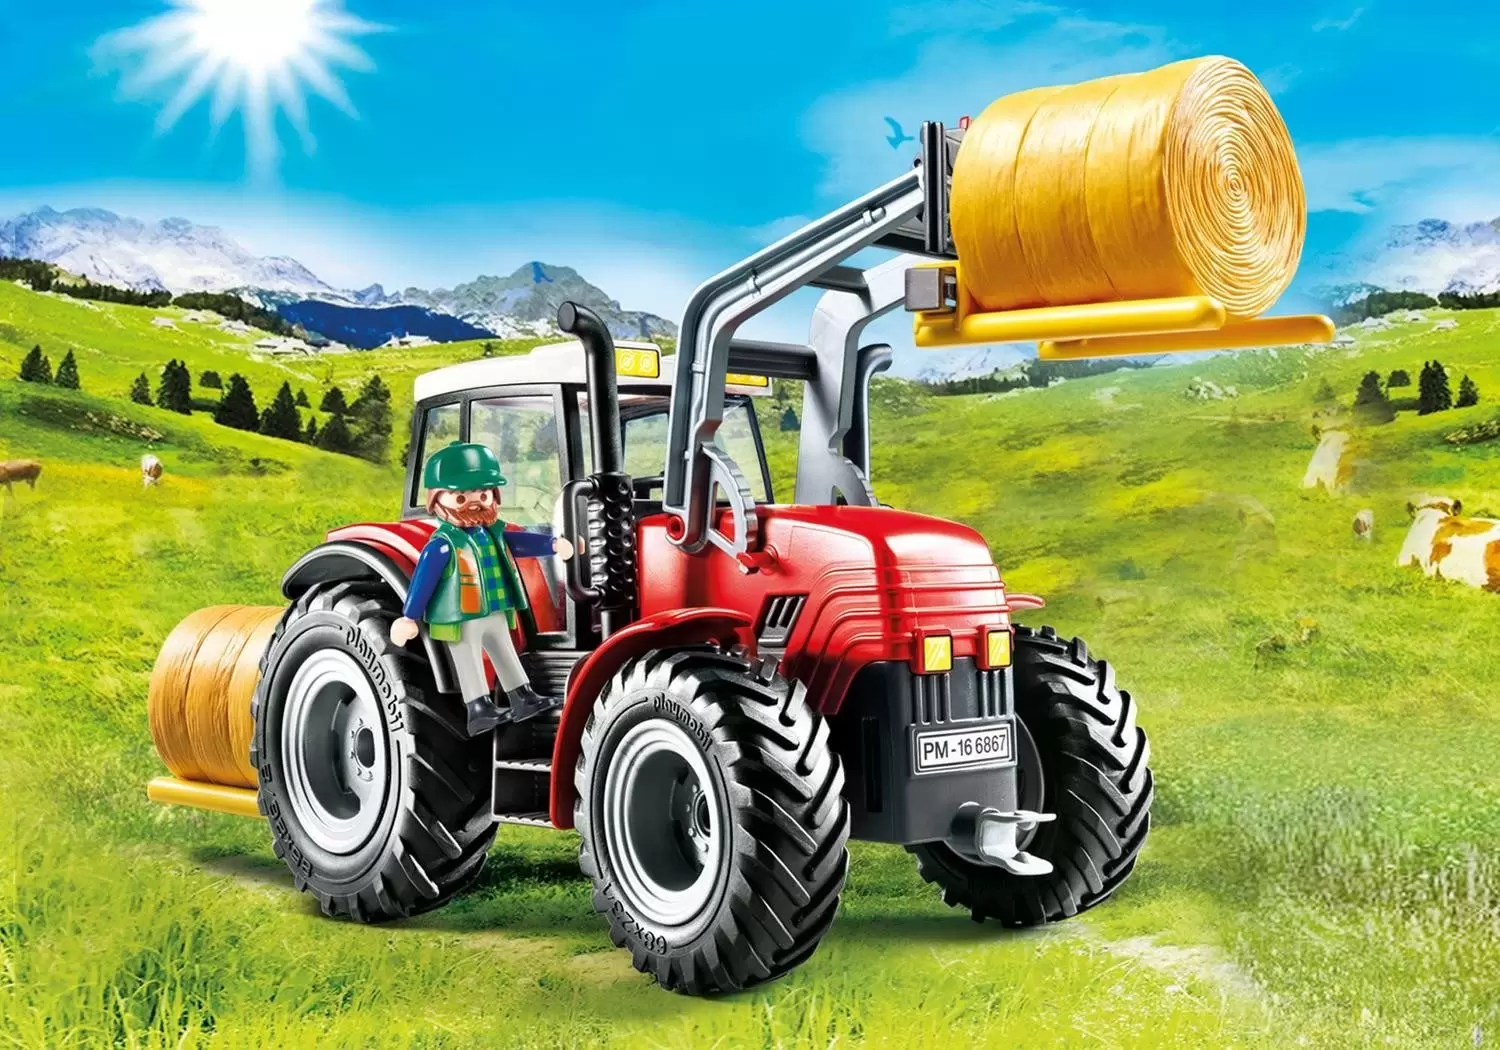 Tractor - 71305